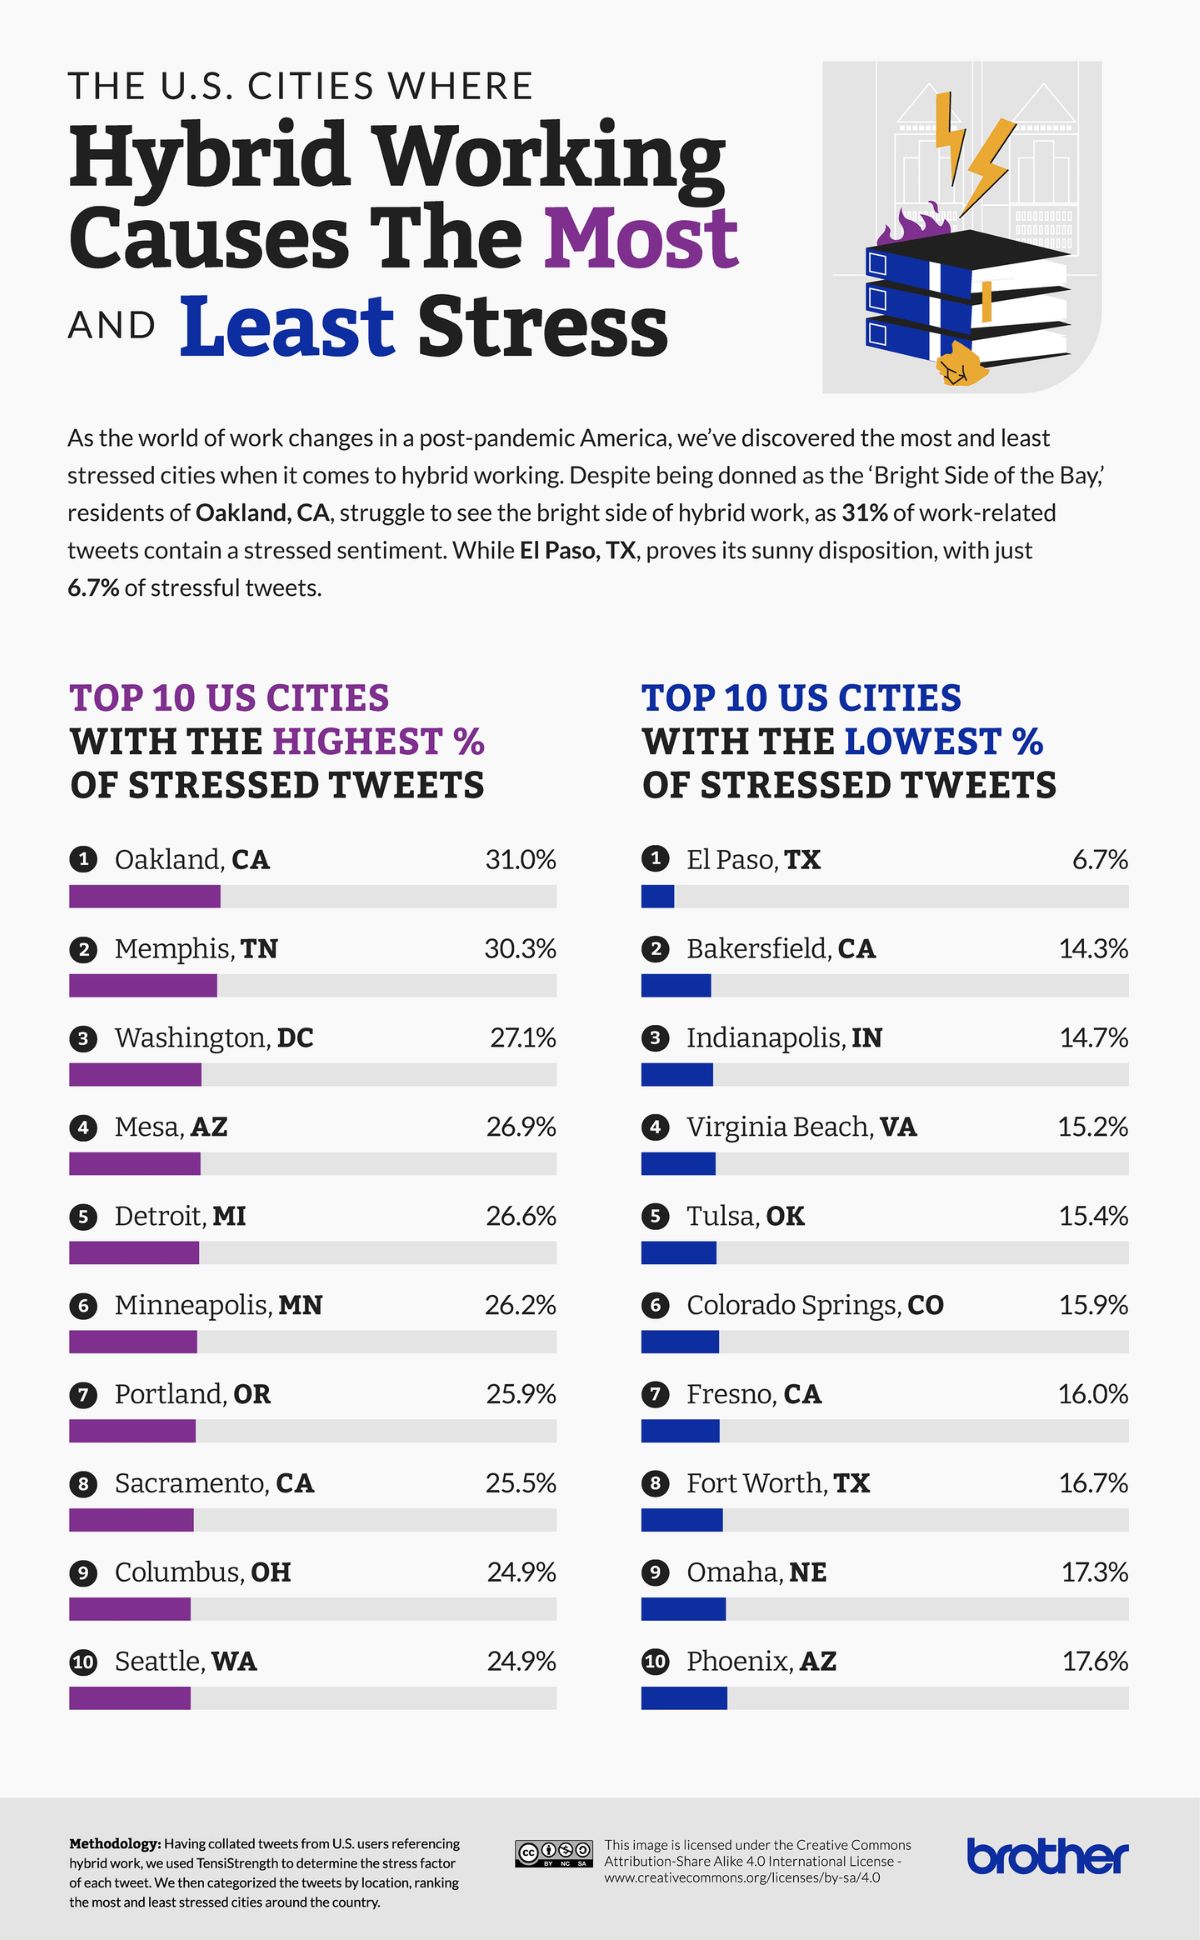 The US Cities where hybrid working causes the most and least stress